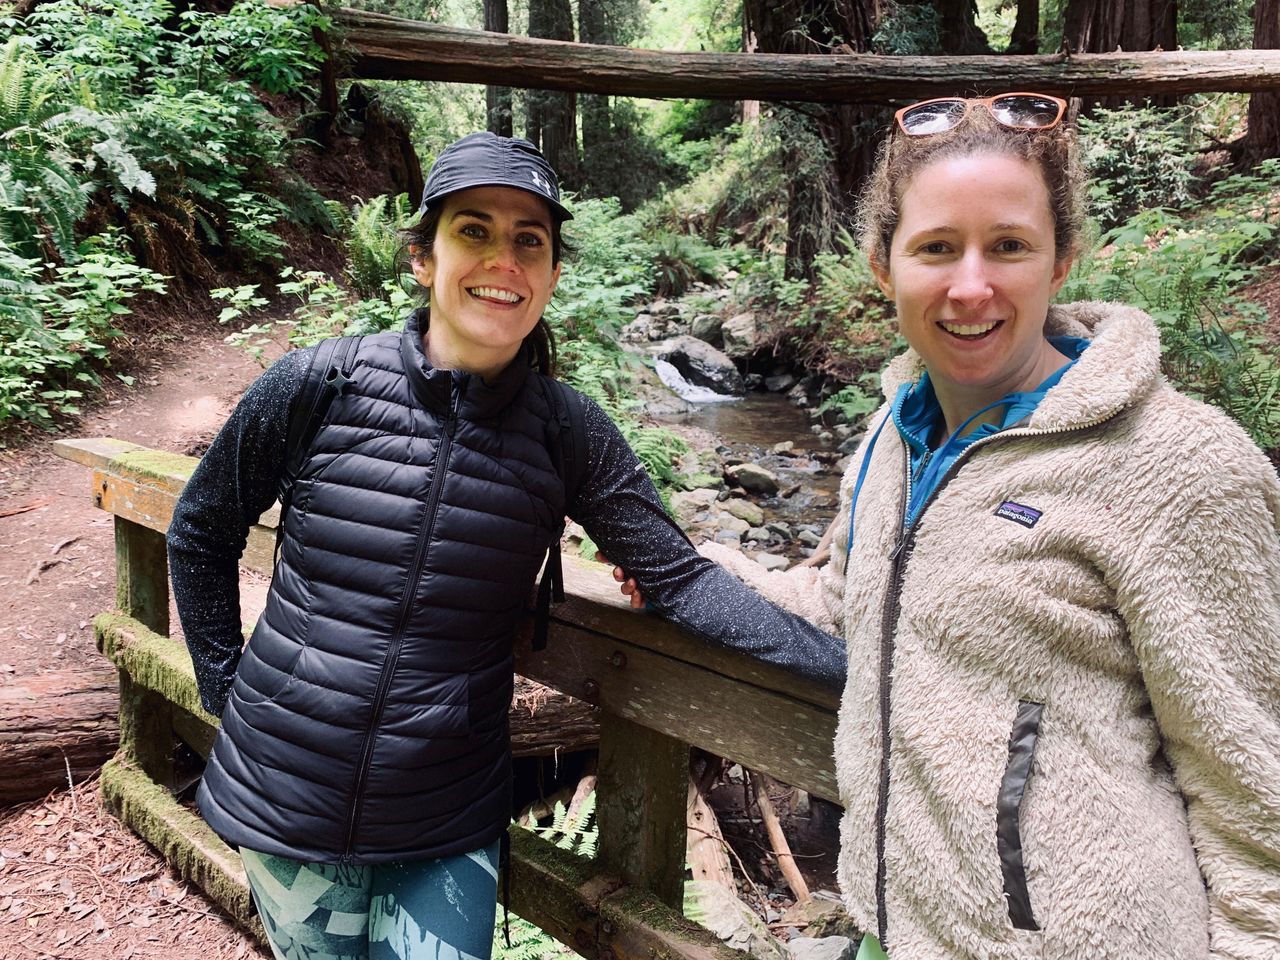 Reilly hiking with her "amazing friend" Tara on Mount Tamalpais in California (May 2019).